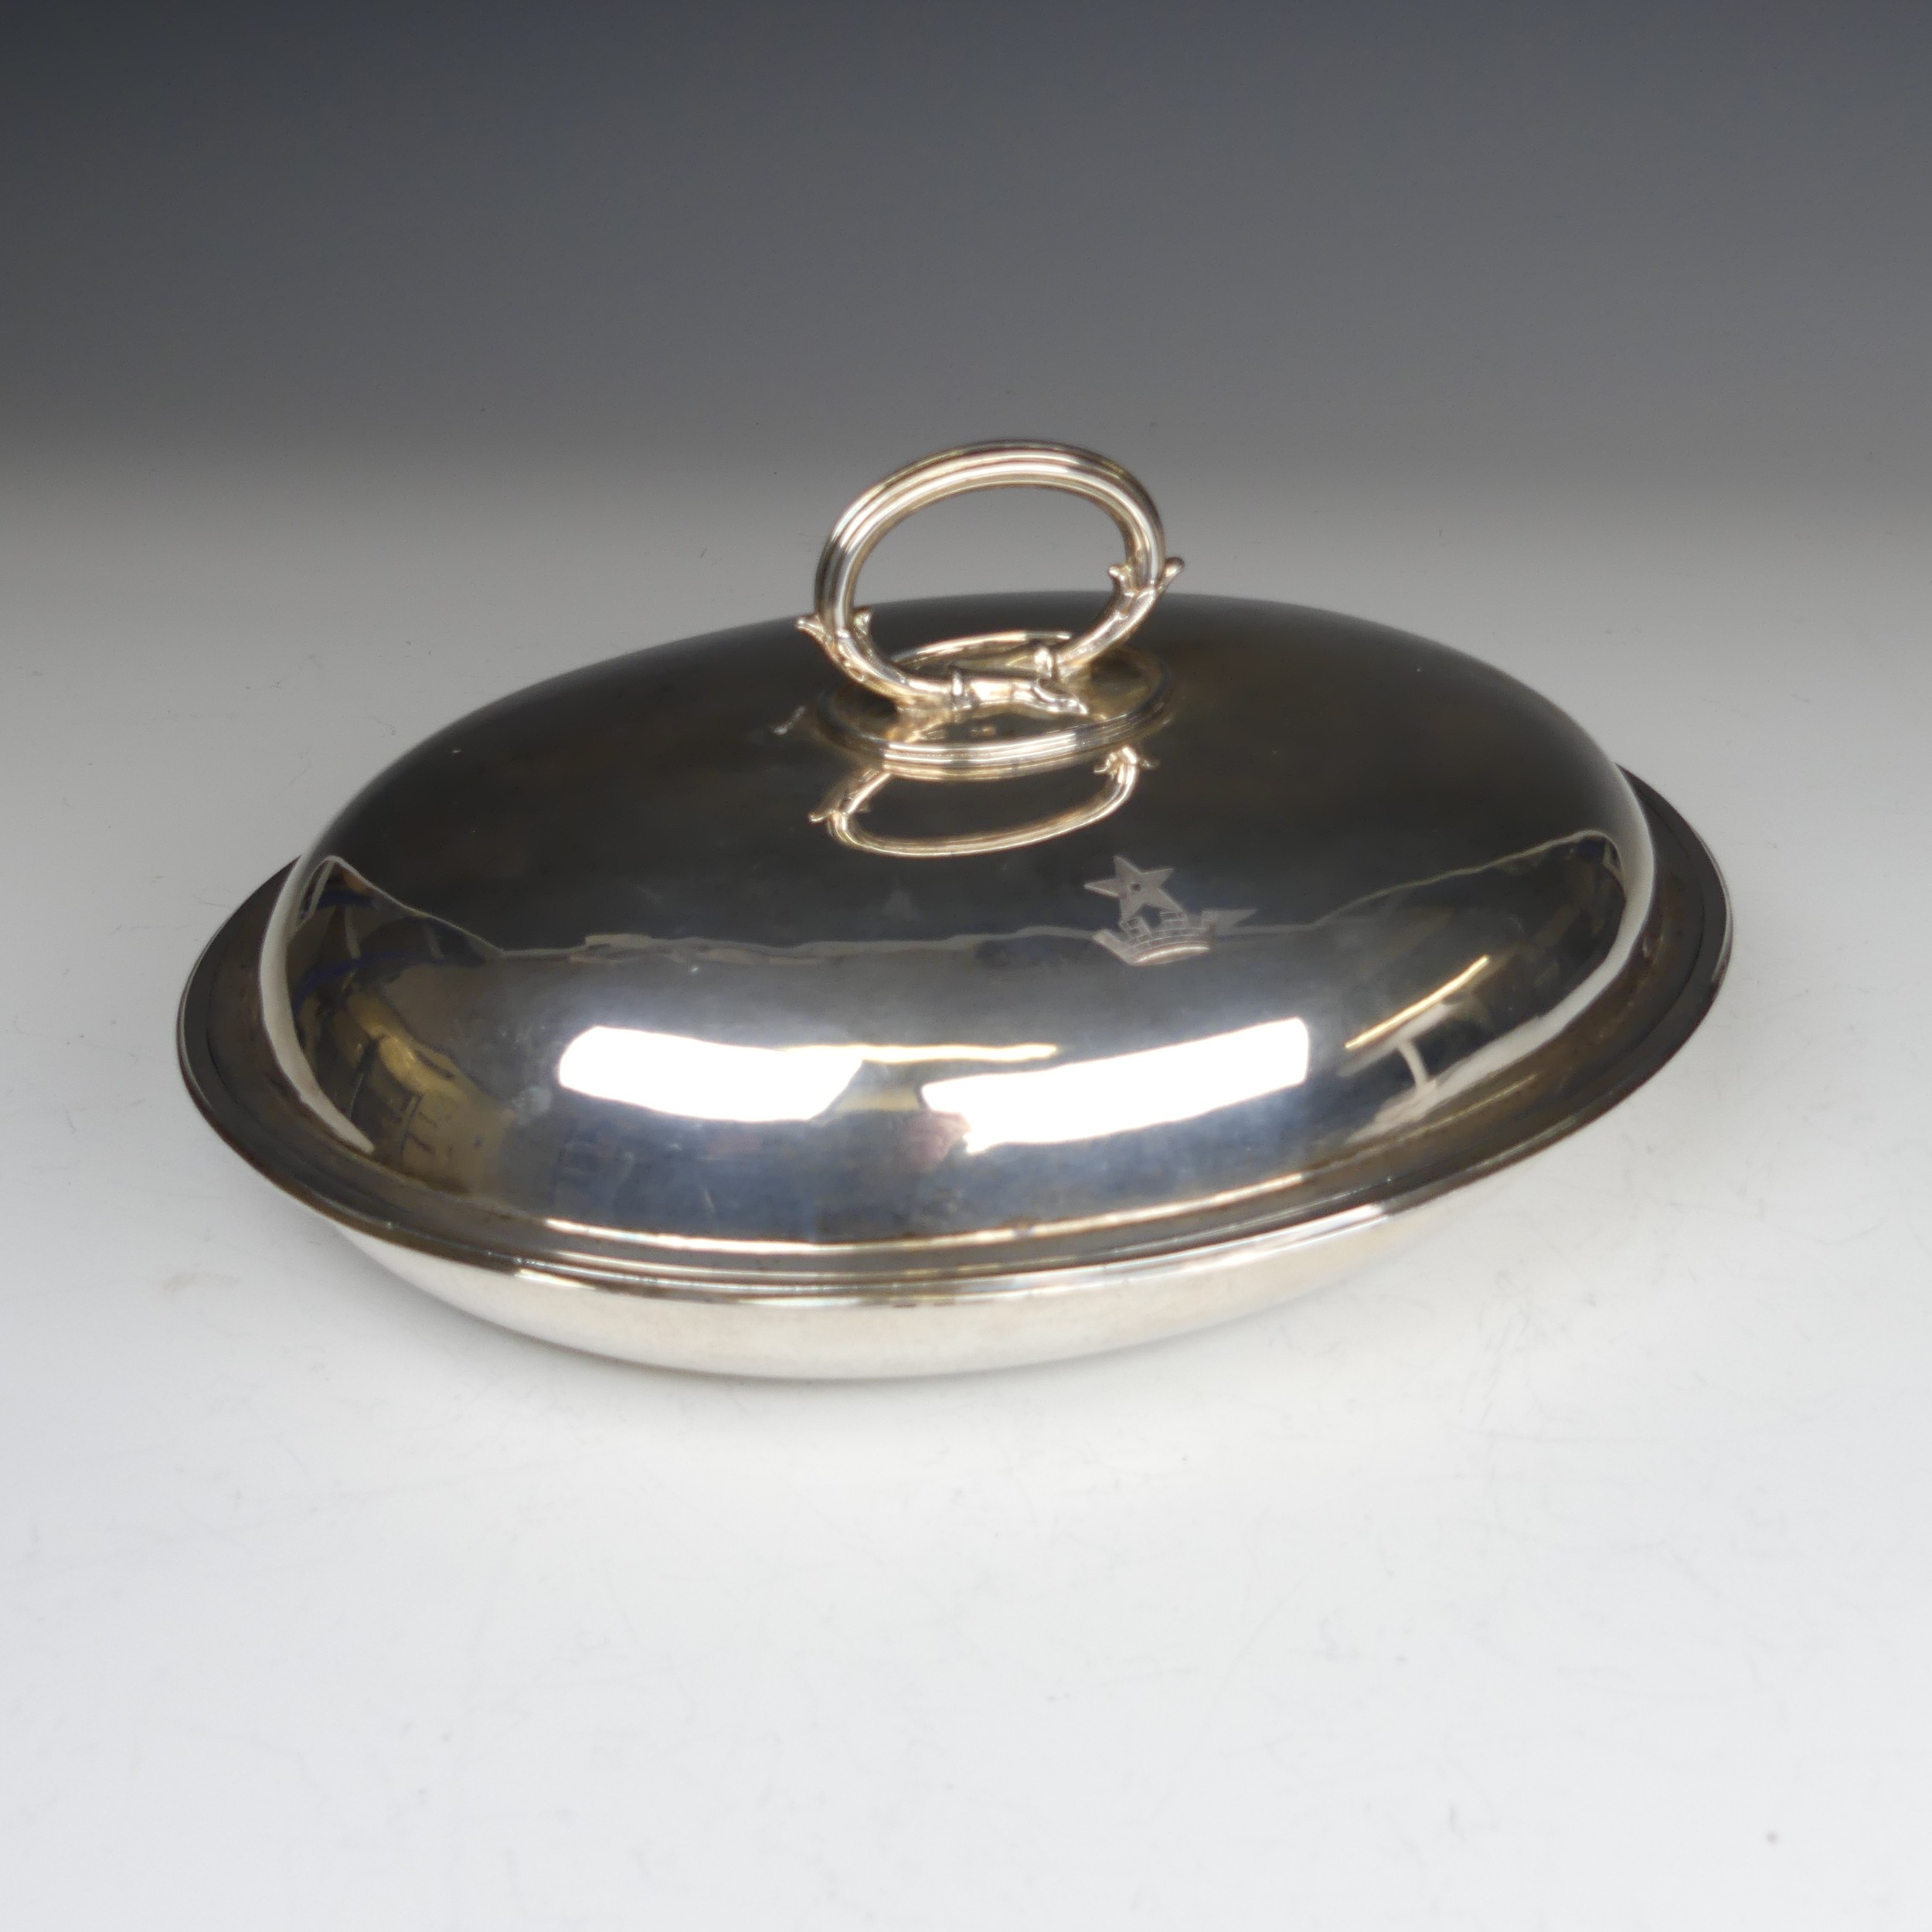 A Victorian oval silver Entrée Dish, hallmarked London 1883, with loop handle, crested with Peile